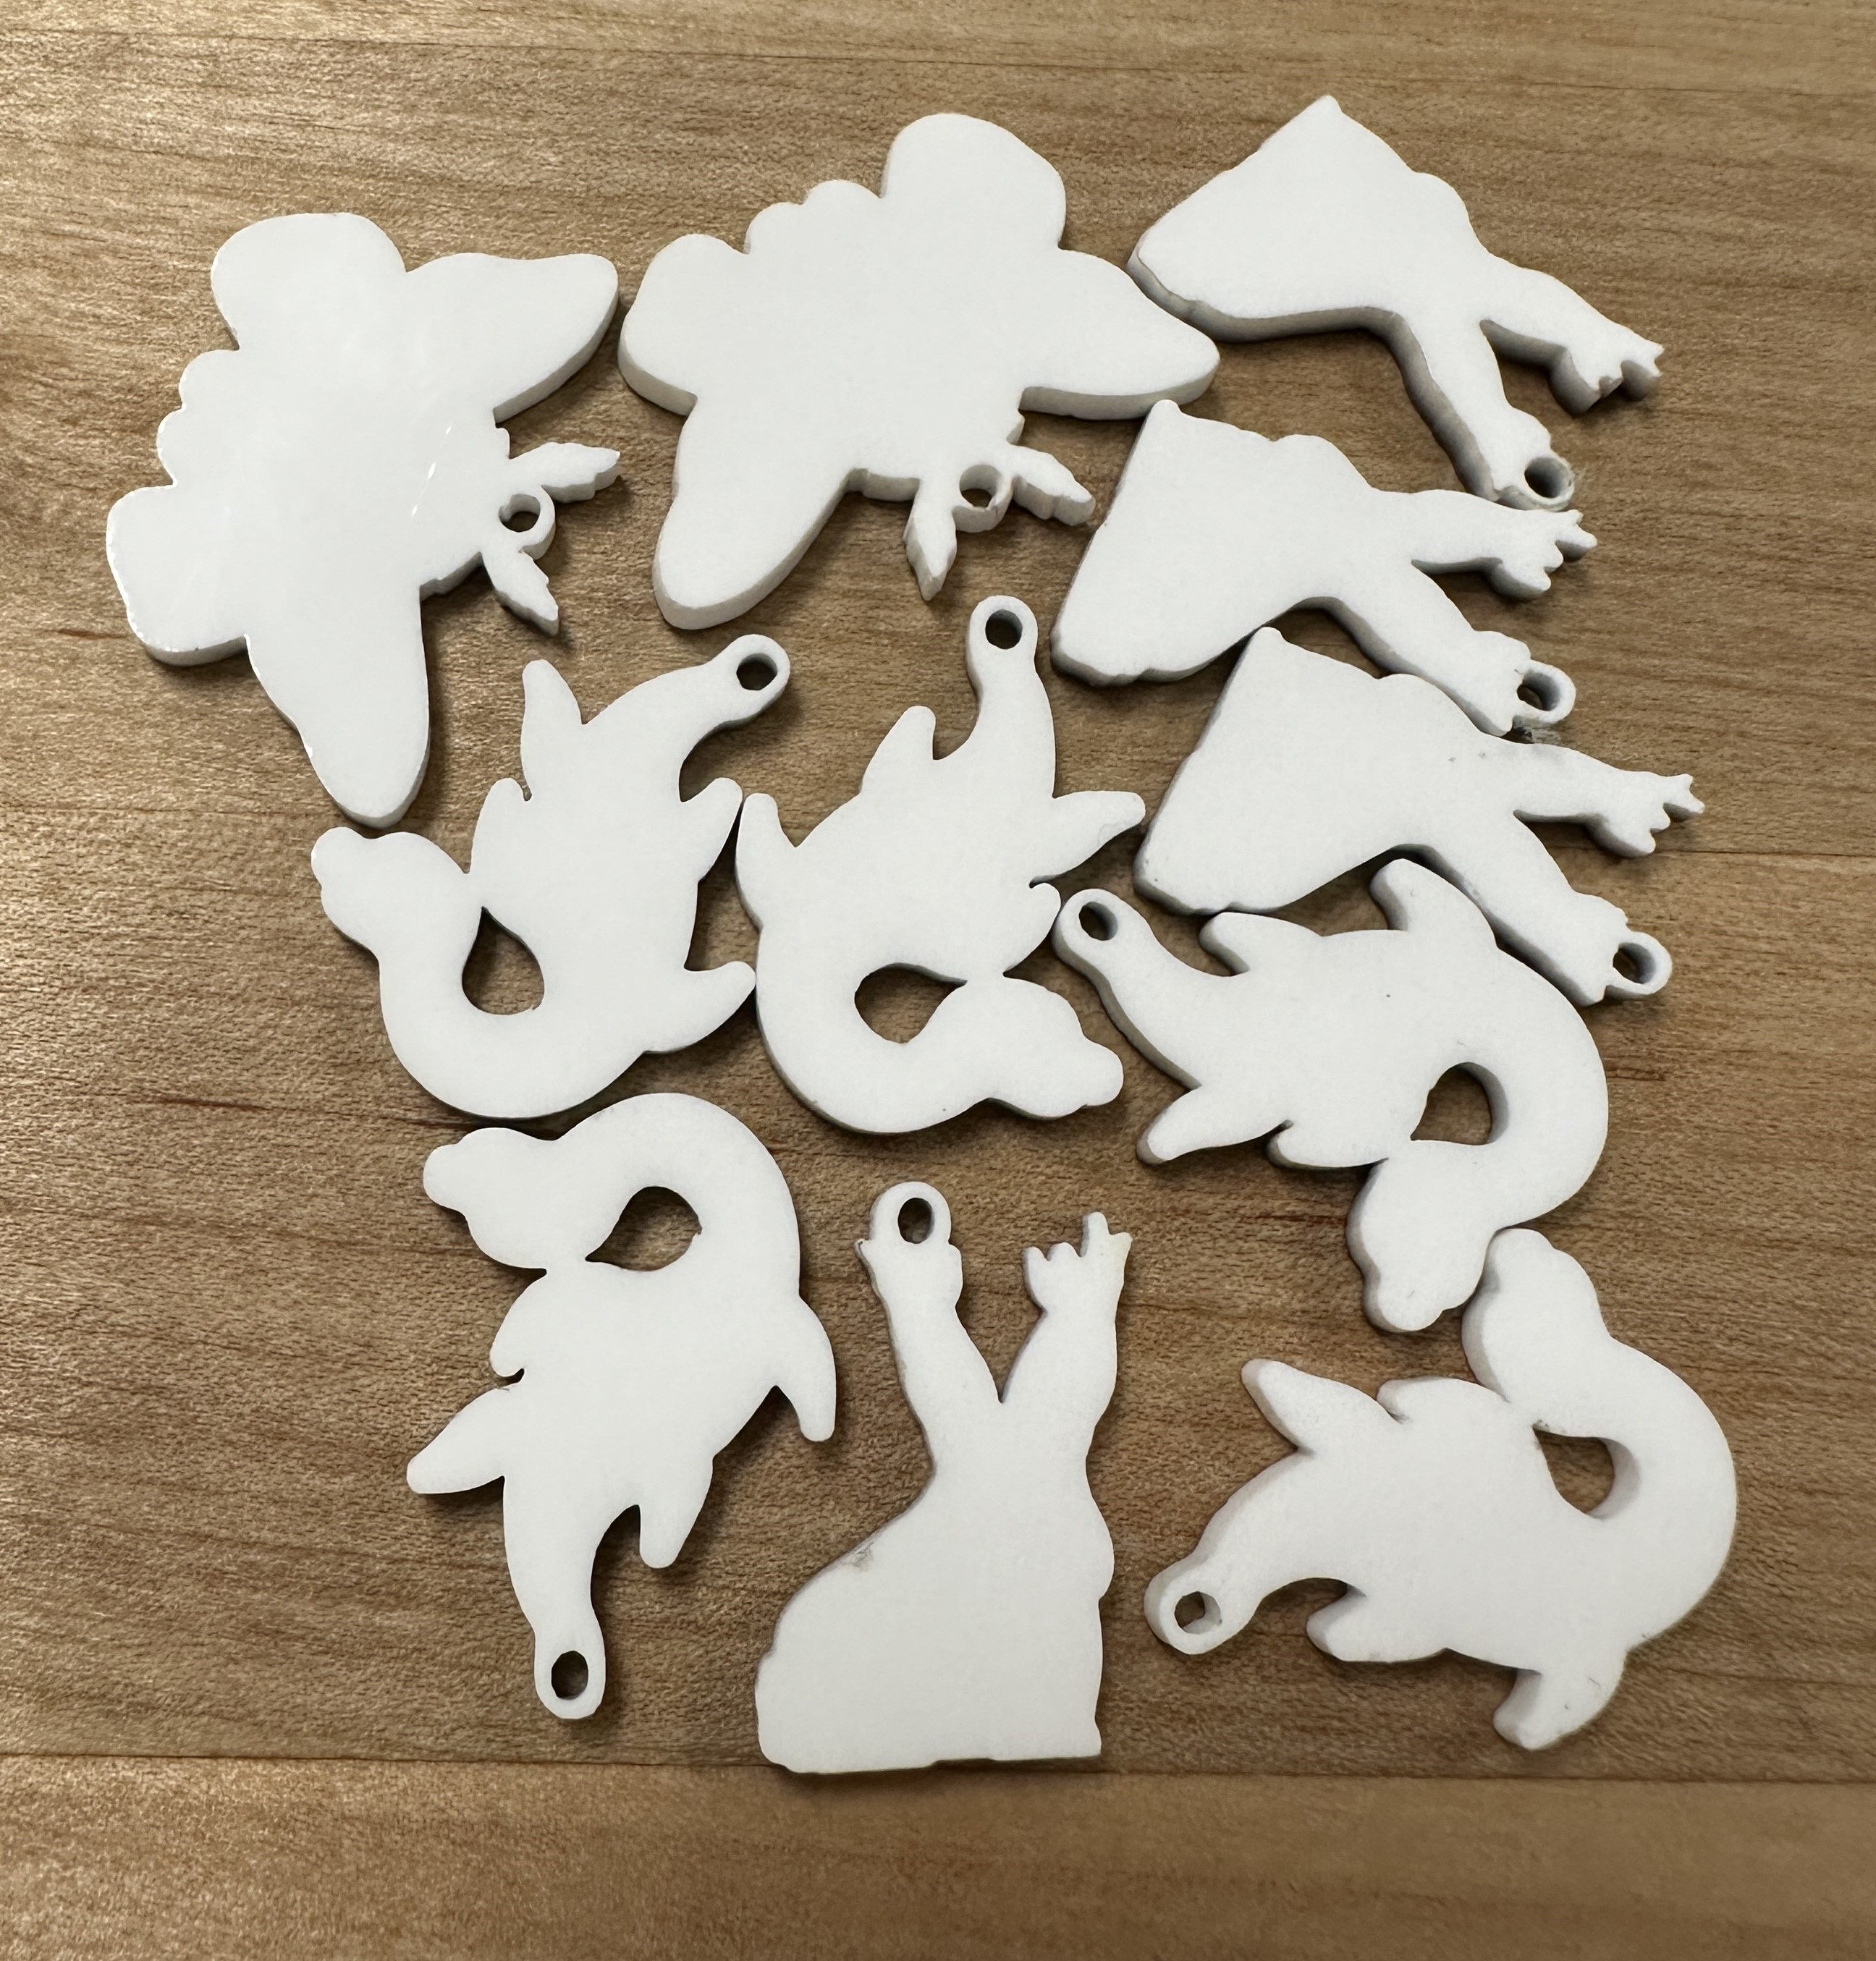 10 solid white acrylic pieces cut into various shapes of cryptids.